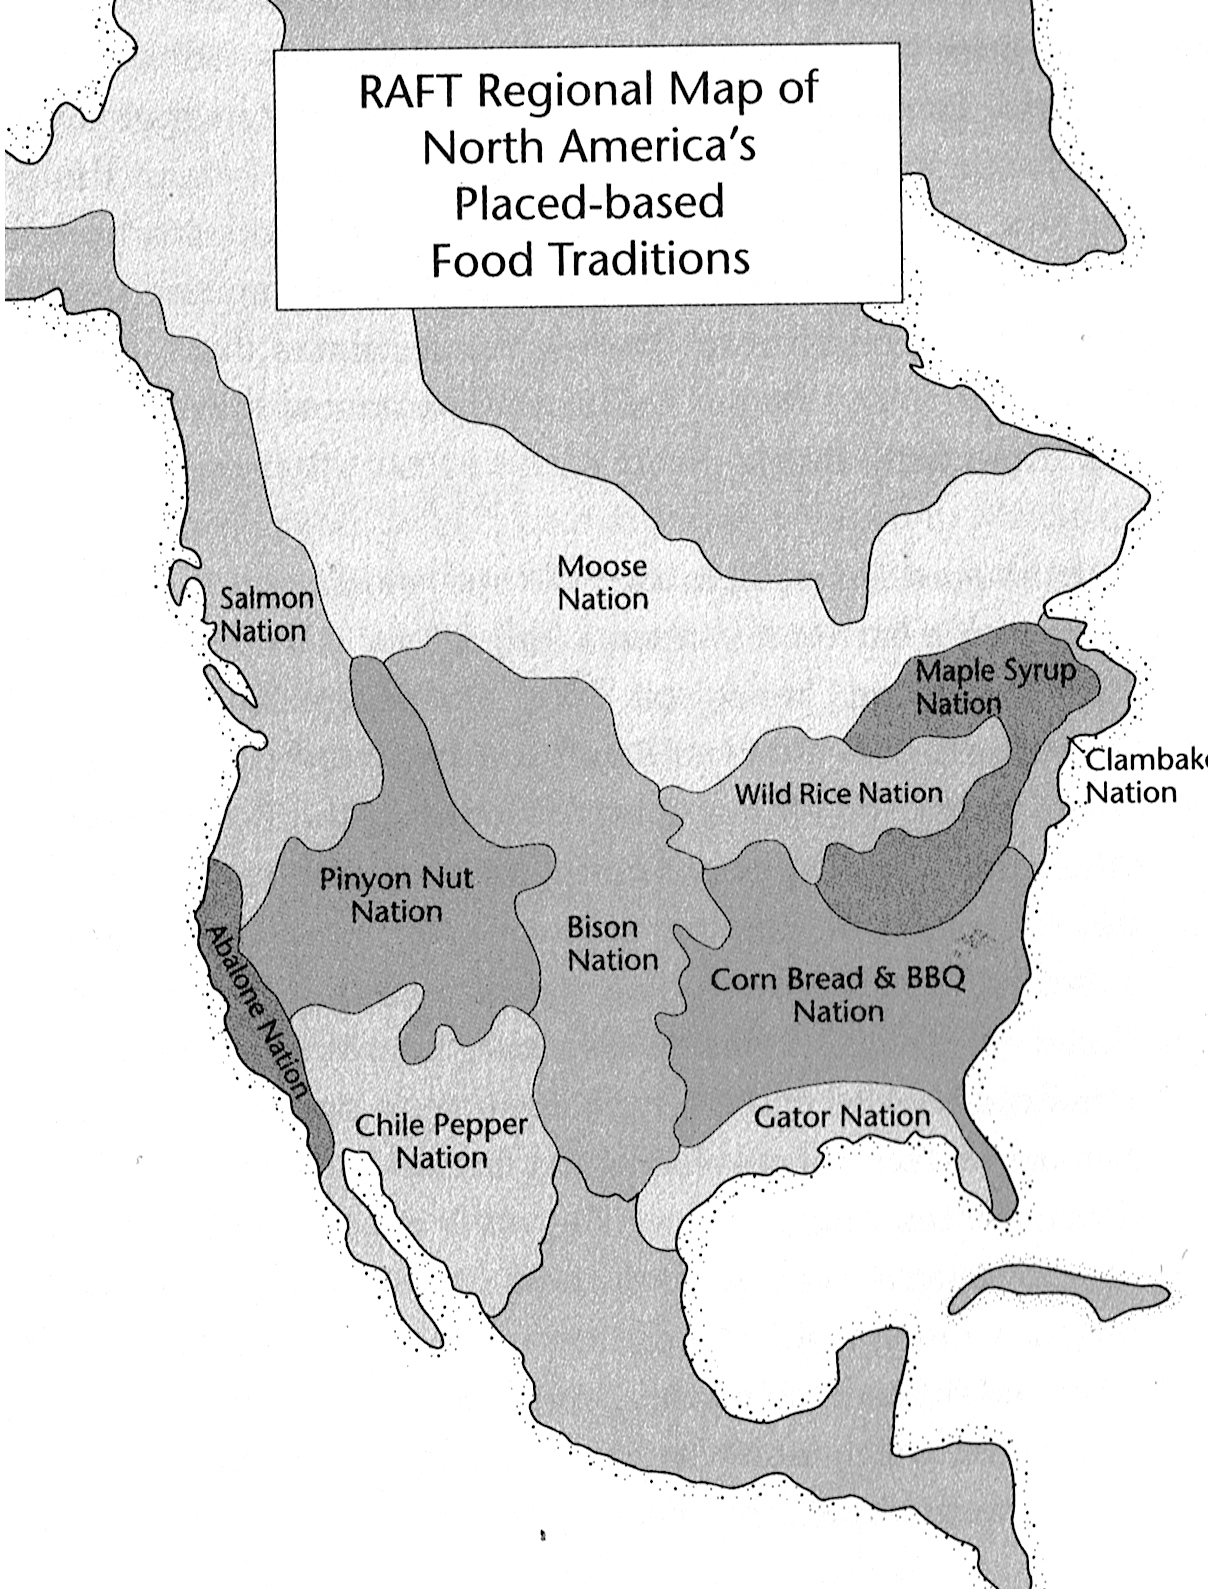 NA Place-Based Food Traditions Map